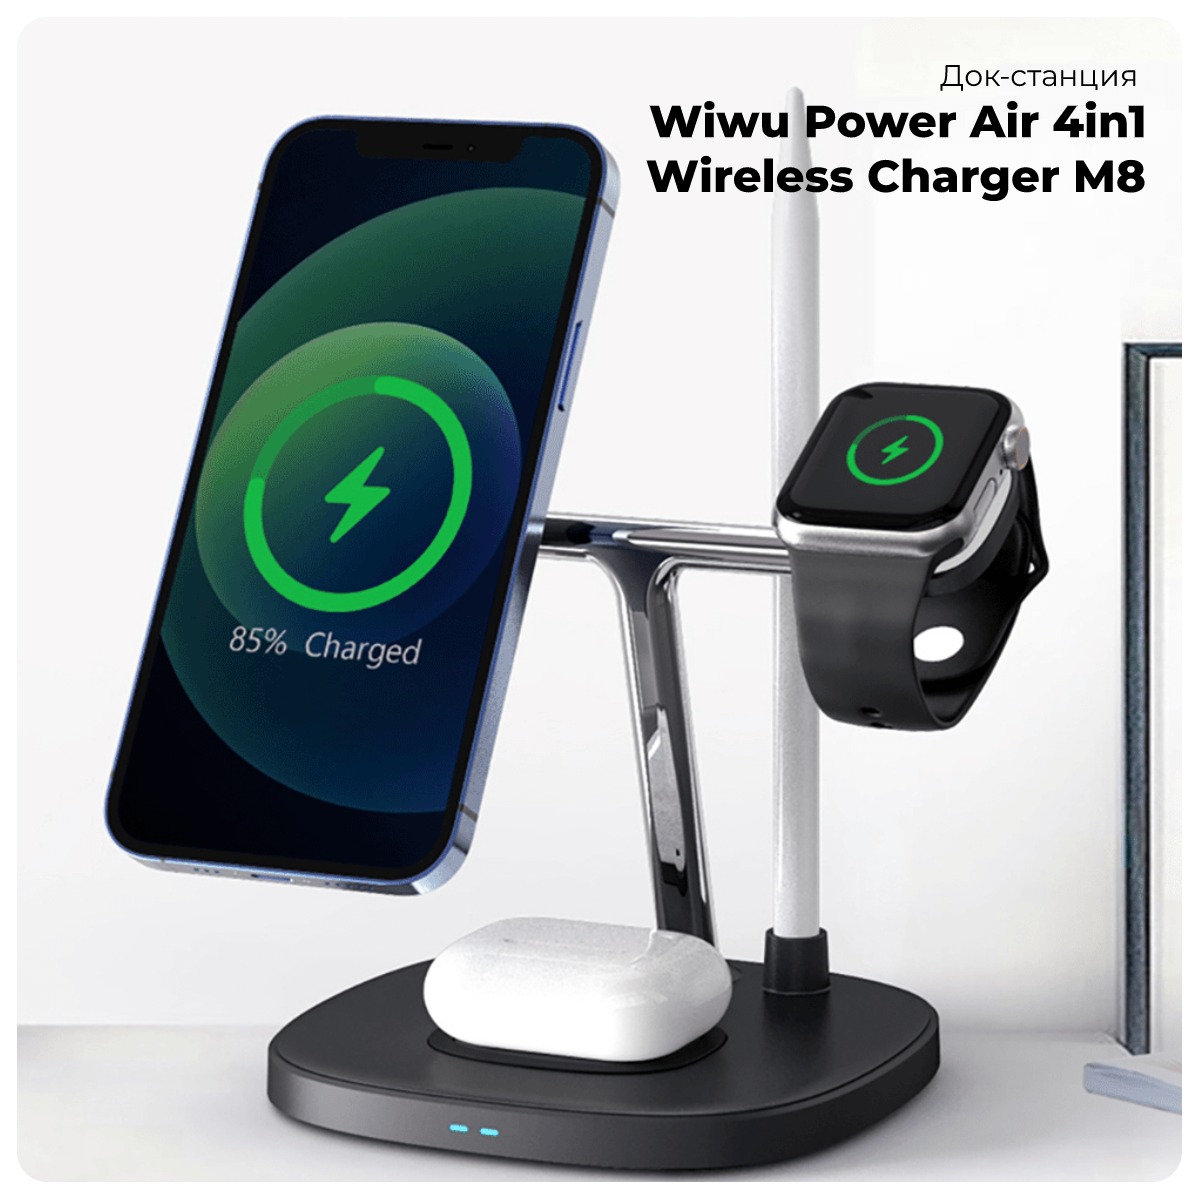 Wiwu-Power-Air-4in1-Wireless-Charger-M8-01